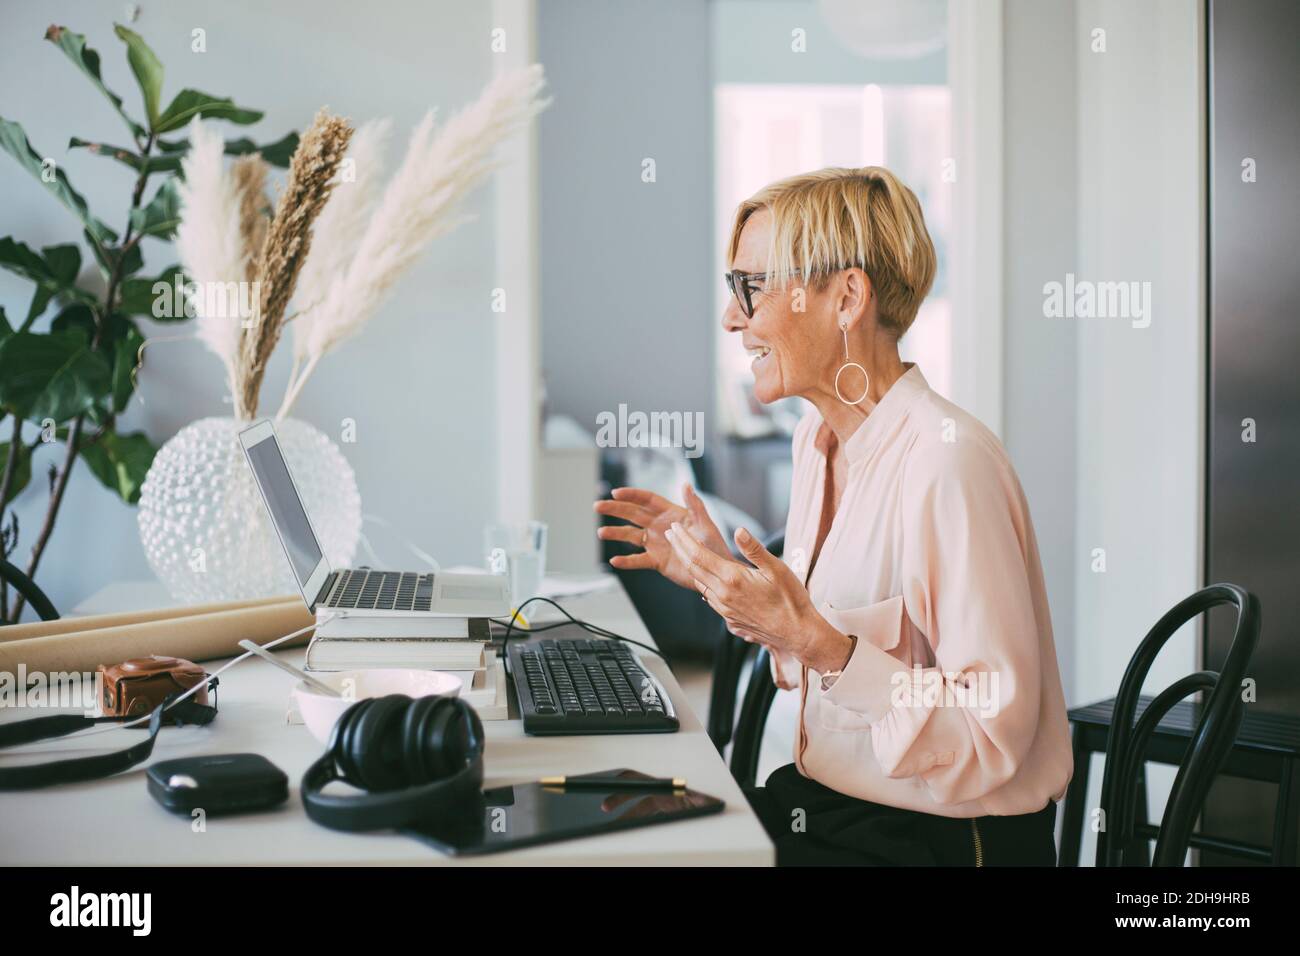 Profile of woman attending video conference at home Stock Photo